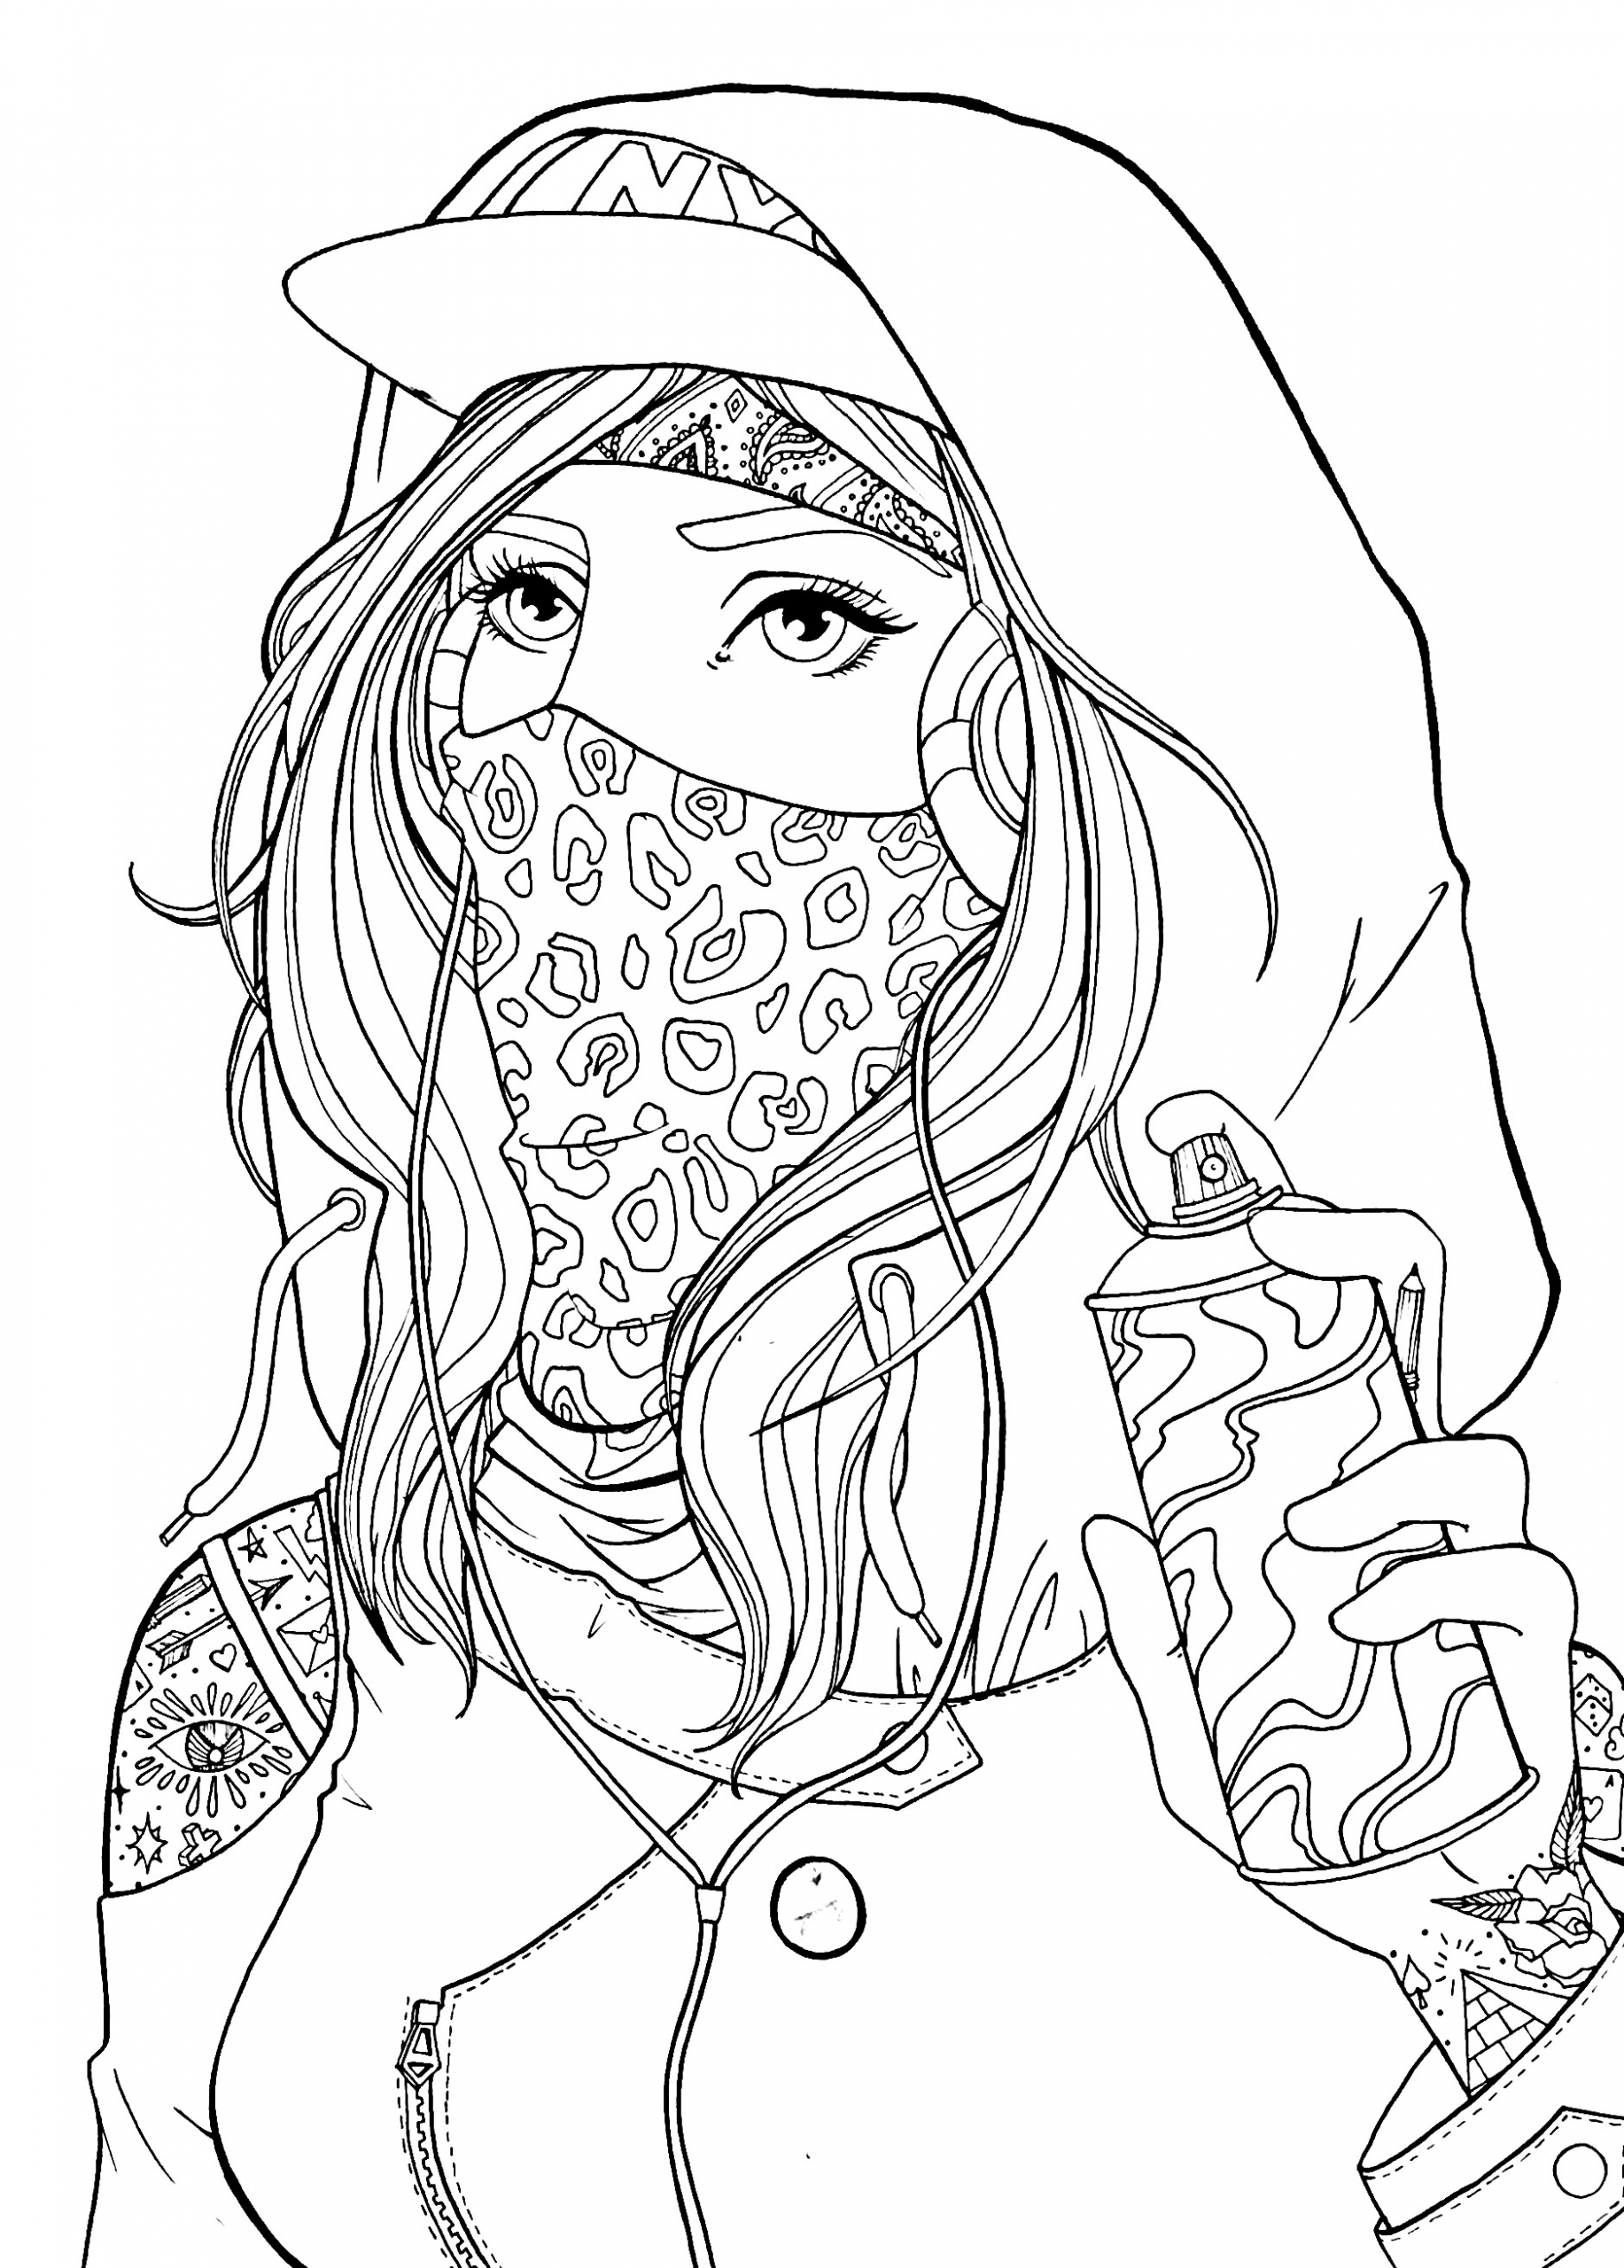 Coloring Pages Of Girls For Adults
 Graffiti girl drawing lineart